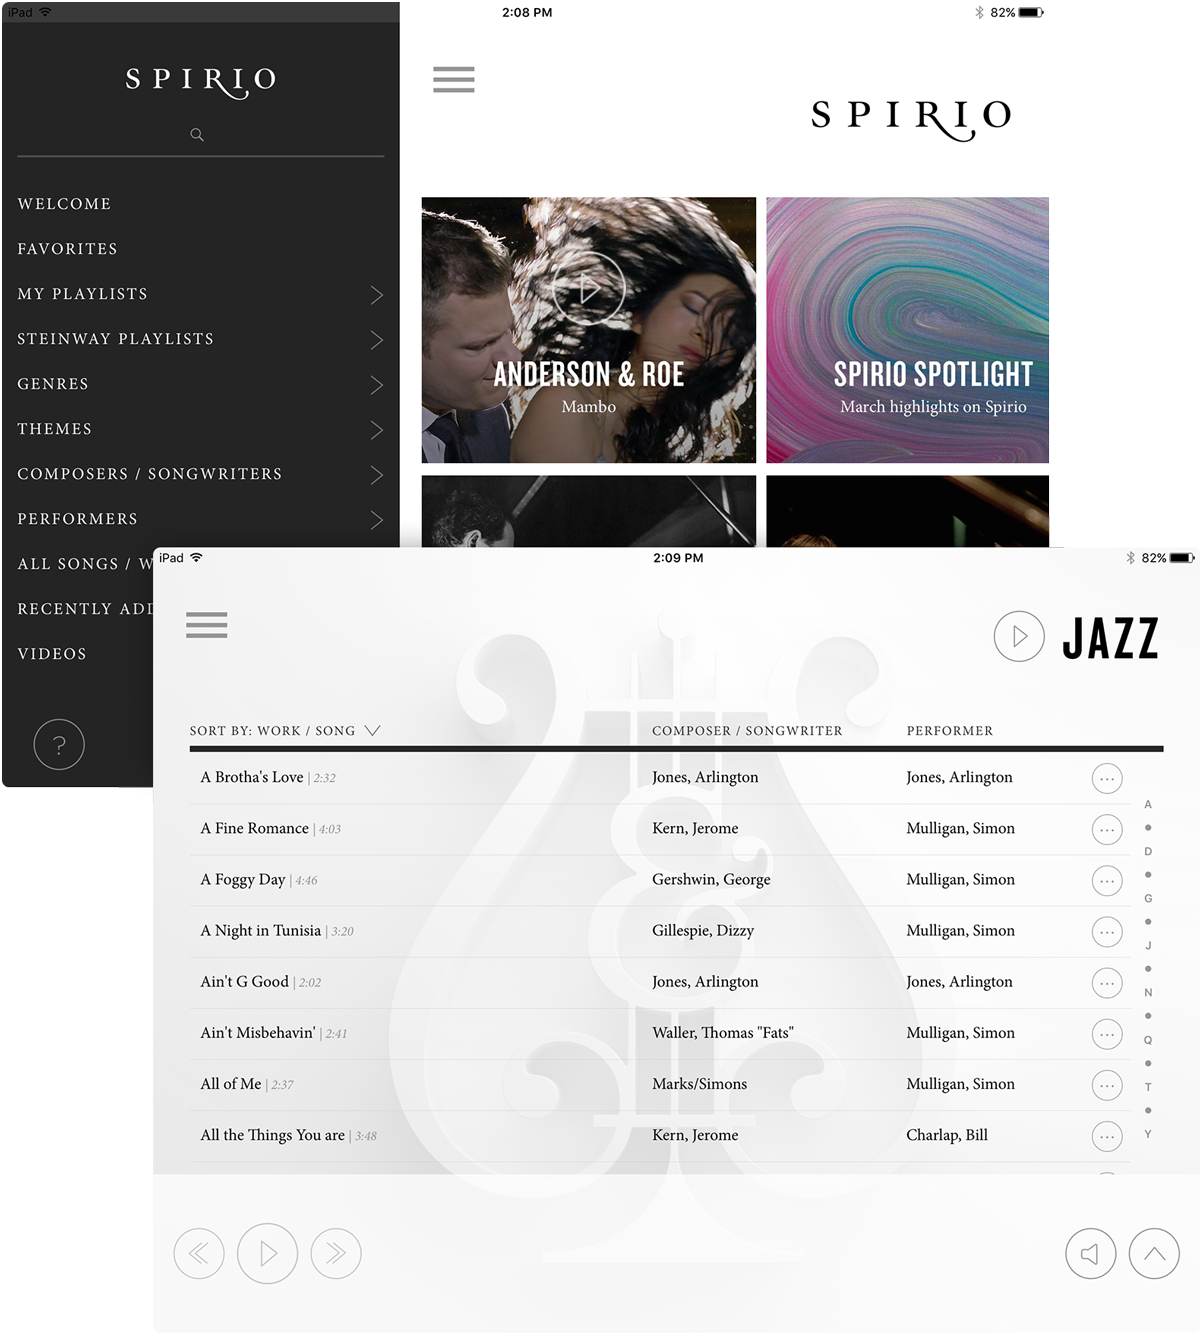 Two additional screenshots from the Steinway Spirio iPad app taking a deeper dive into the Jazz category song list.